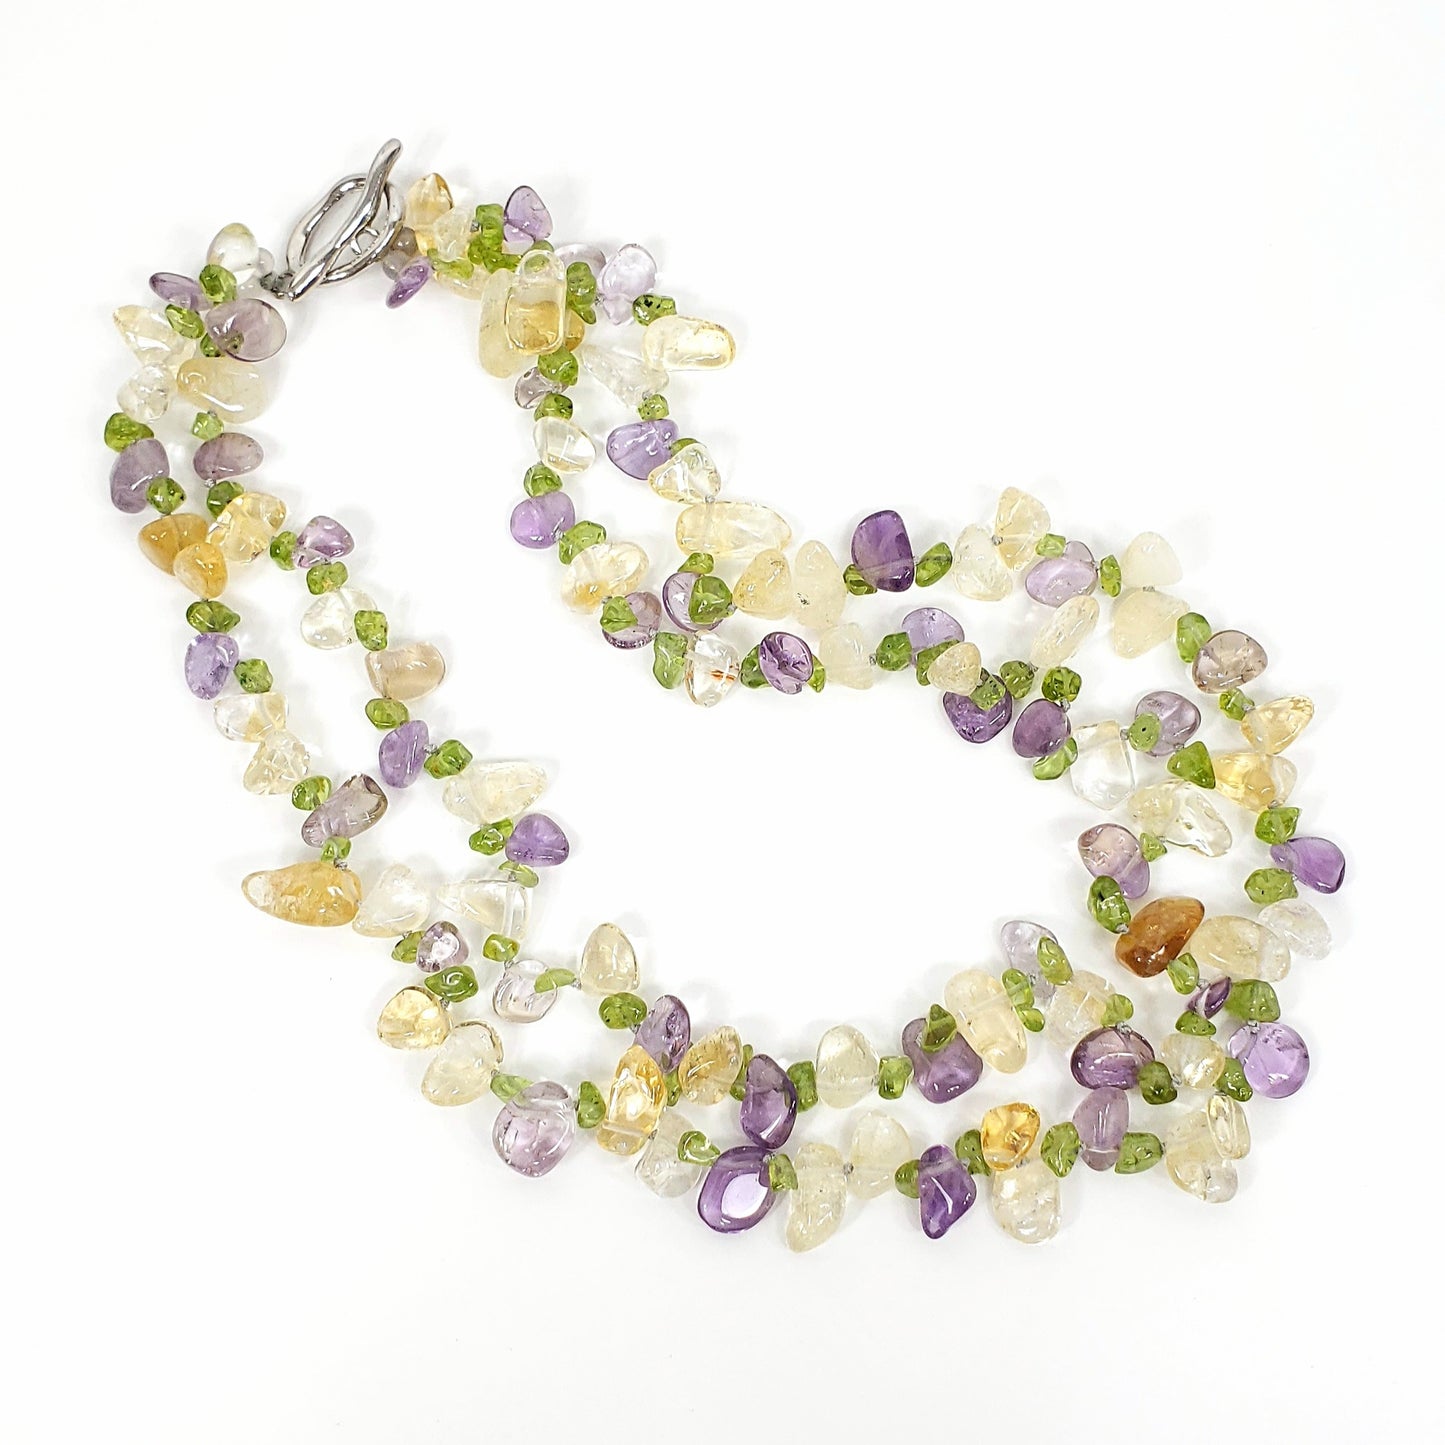 Double Strand Necklace with Citrine, Amethyst and Peridot